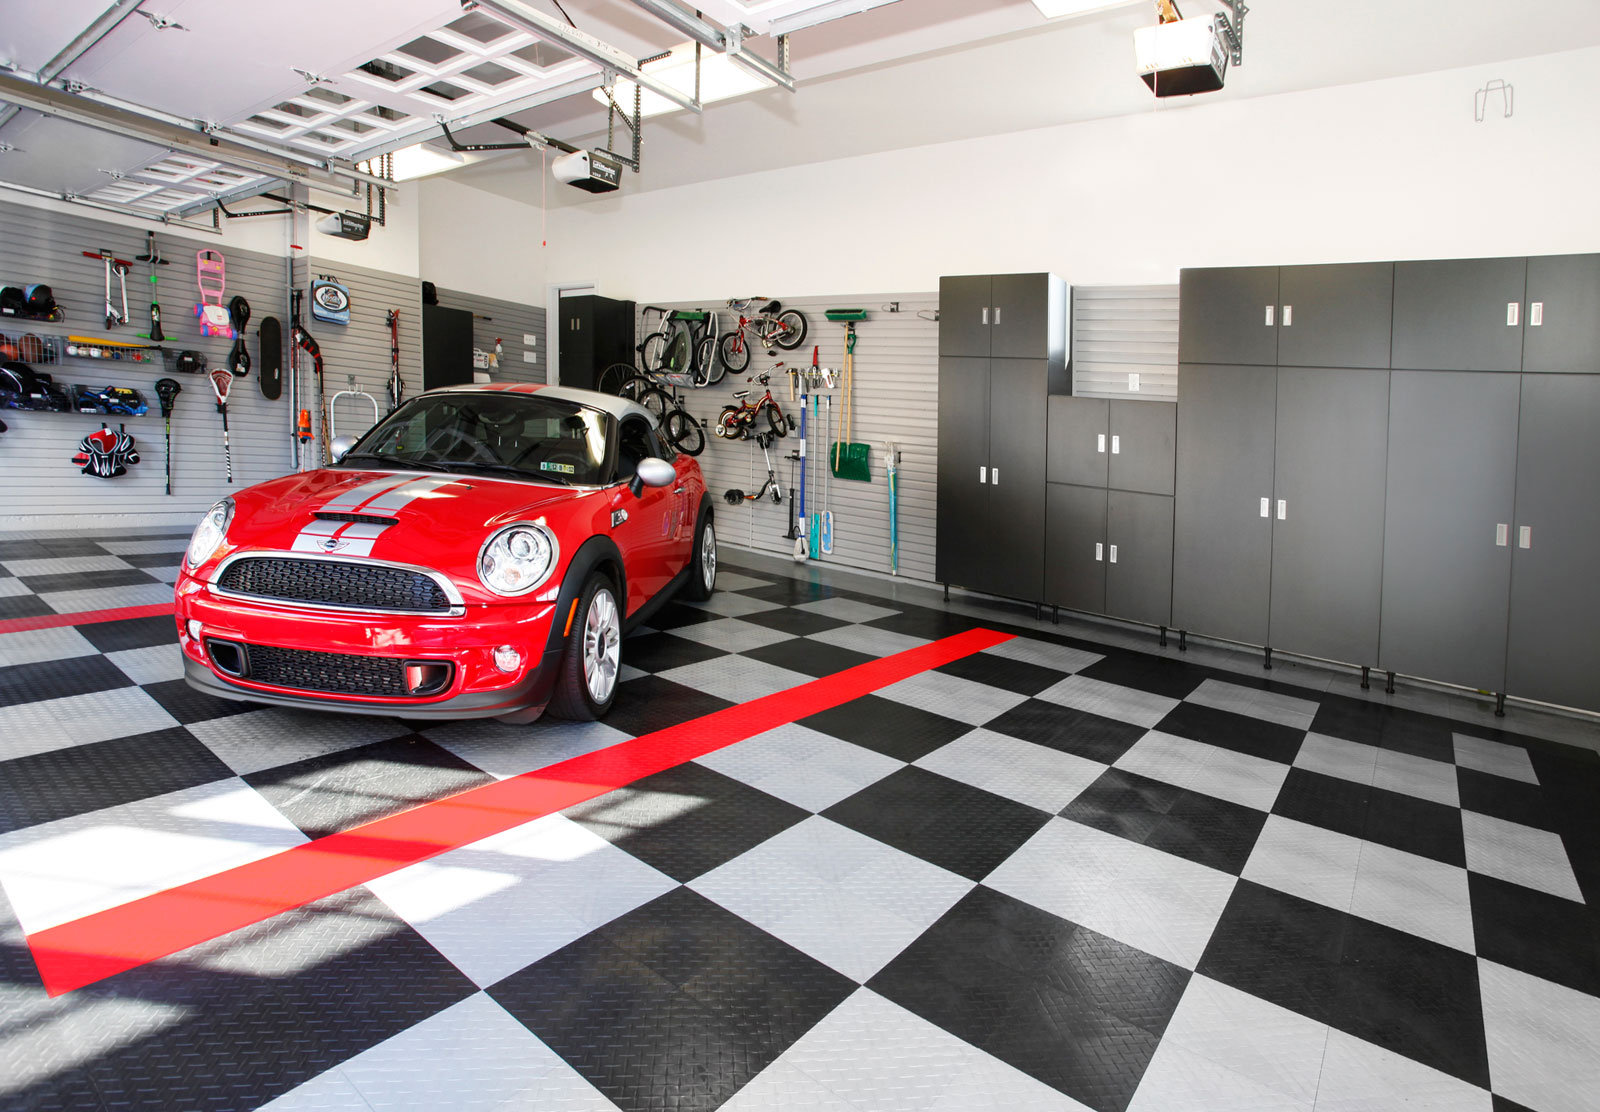 Garage Design With Excellent Minimalist Garage Design Ideas Decorated With Astounding Contemporary Style Using Black And White Tile Flooring And Grey Cabinet Decoration Garage Design Ideas With Cabinet And Hanger Compartment For The Sake Of Good Arrangement